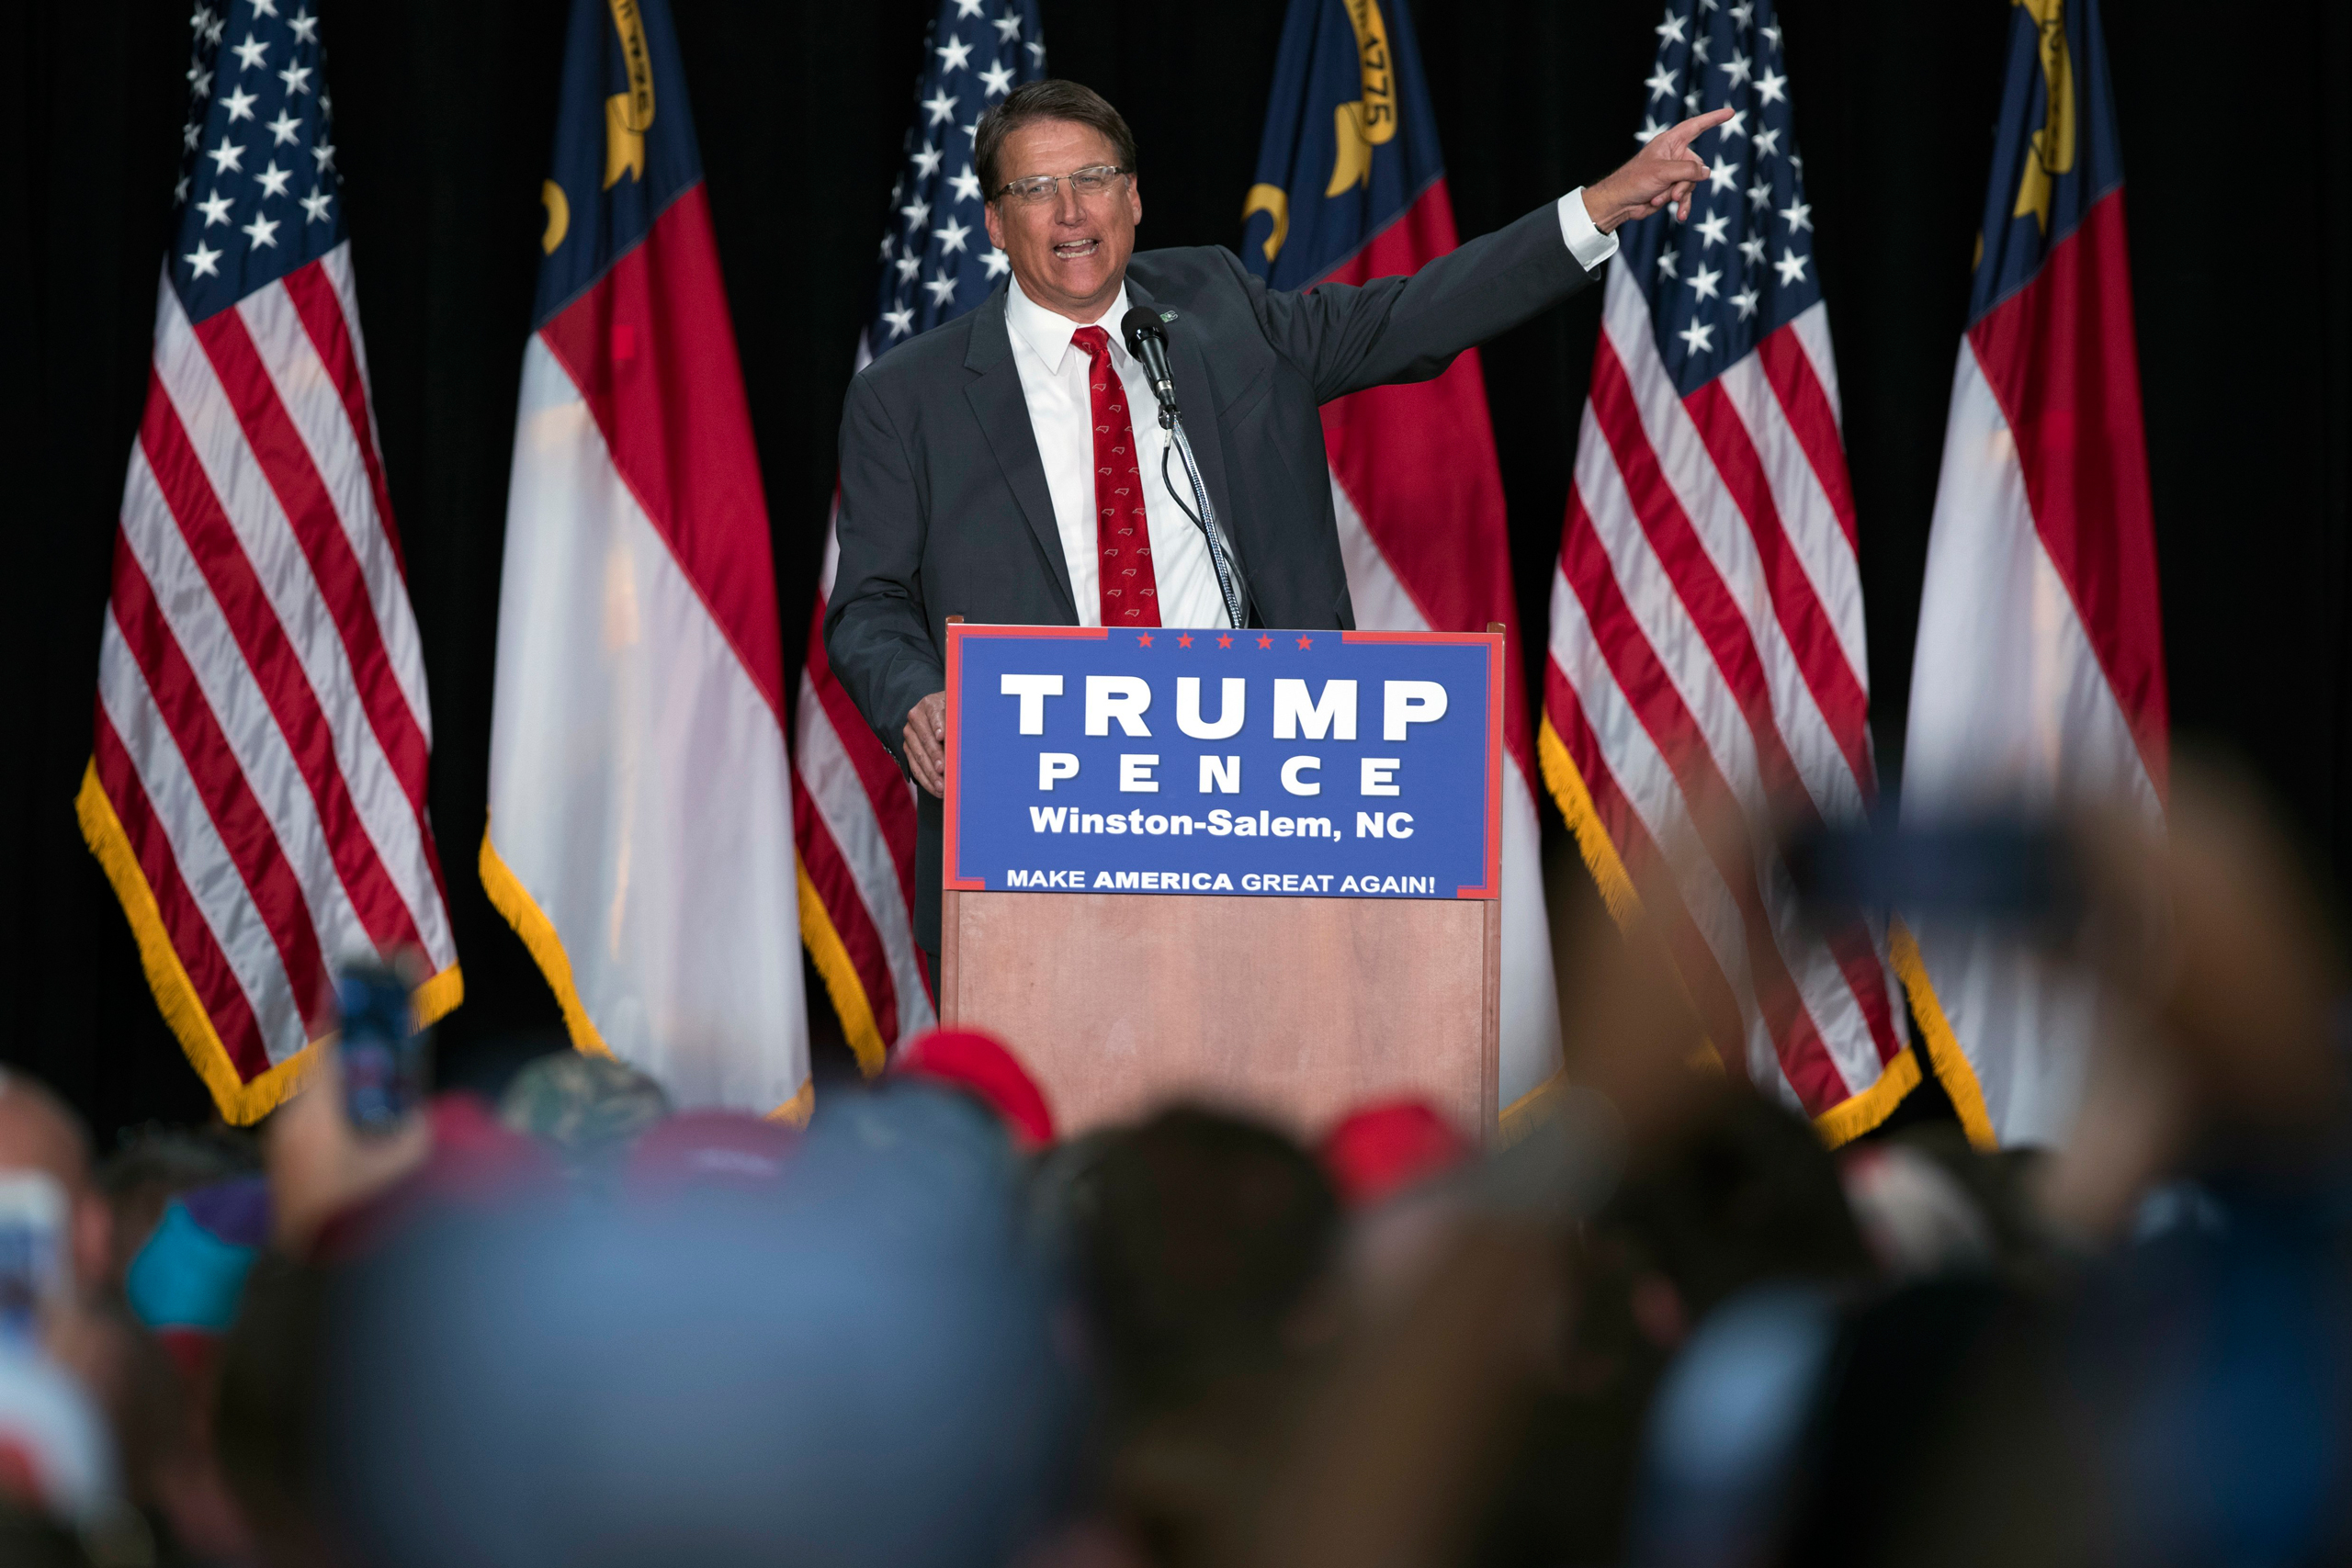 Gov. Pat McCrory speaks during a campaign rally supporting Republican presidential candidate Donald Trump  in Winston-Salem, N.C., on July 25, 2016. (Evan Vucci—AP)